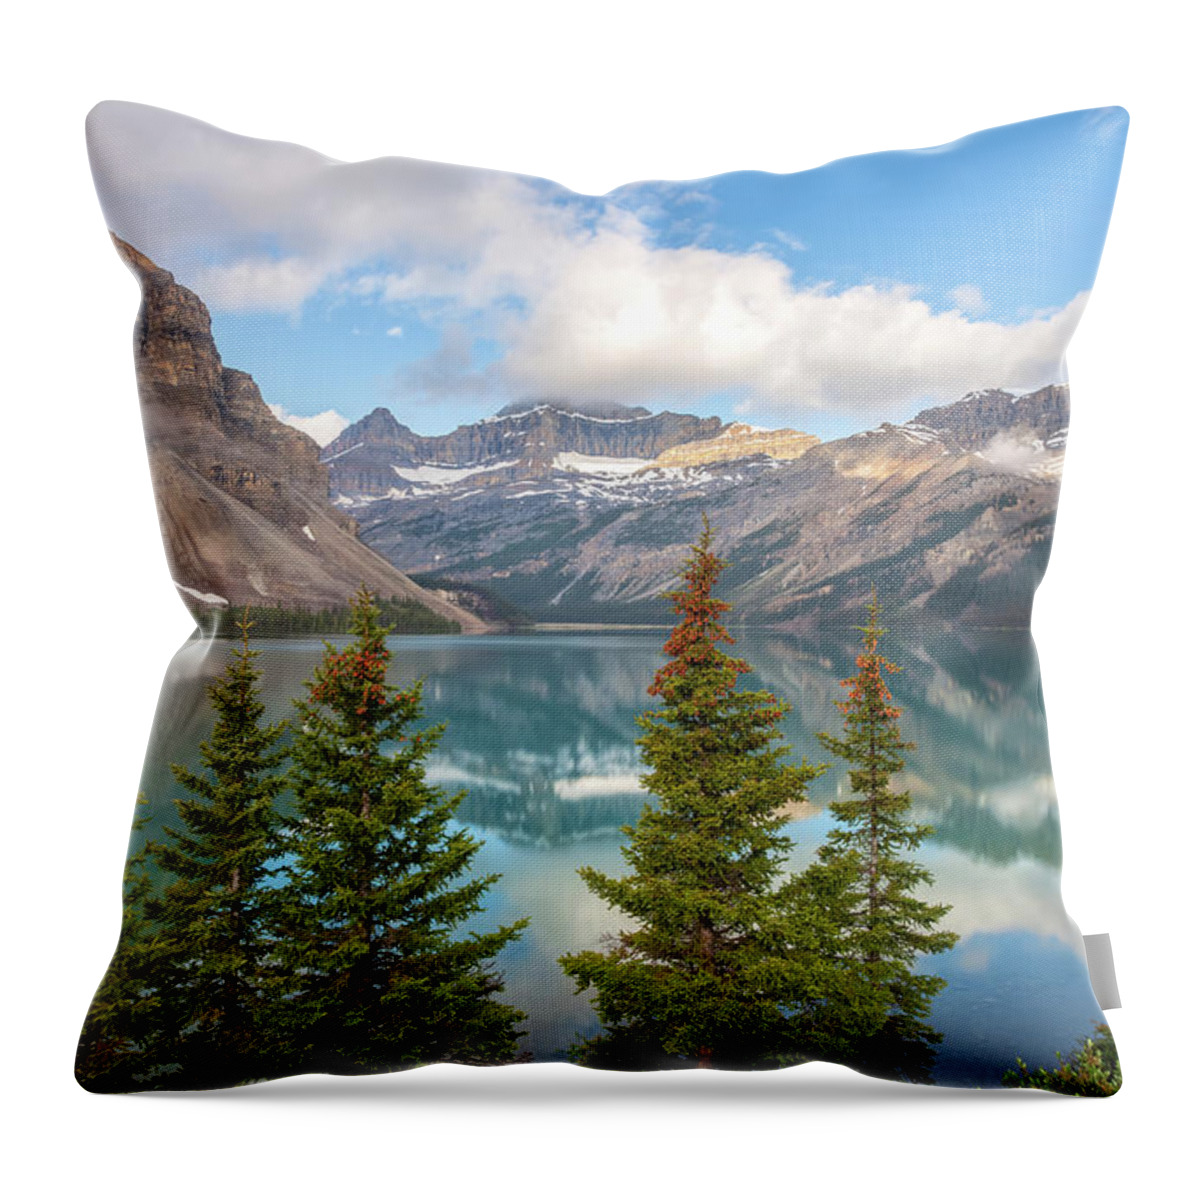 Canadian Rockies Throw Pillow featuring the photograph Bow Lake by Jonathan Nguyen